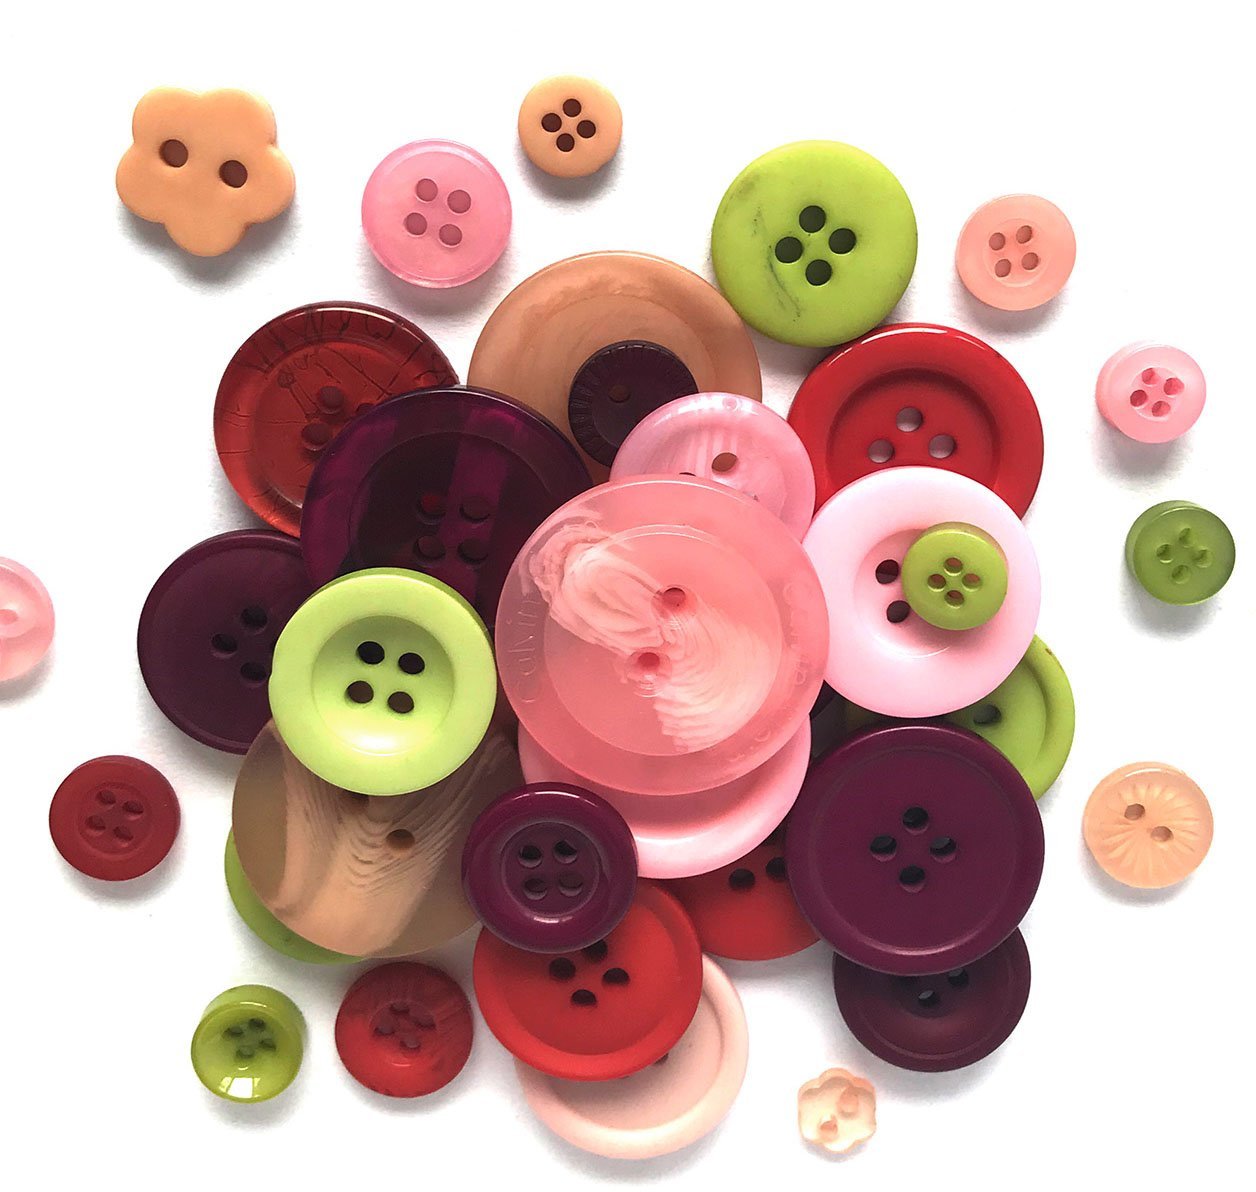 Vintage Buttons - BB12 - Buttons Galore and More